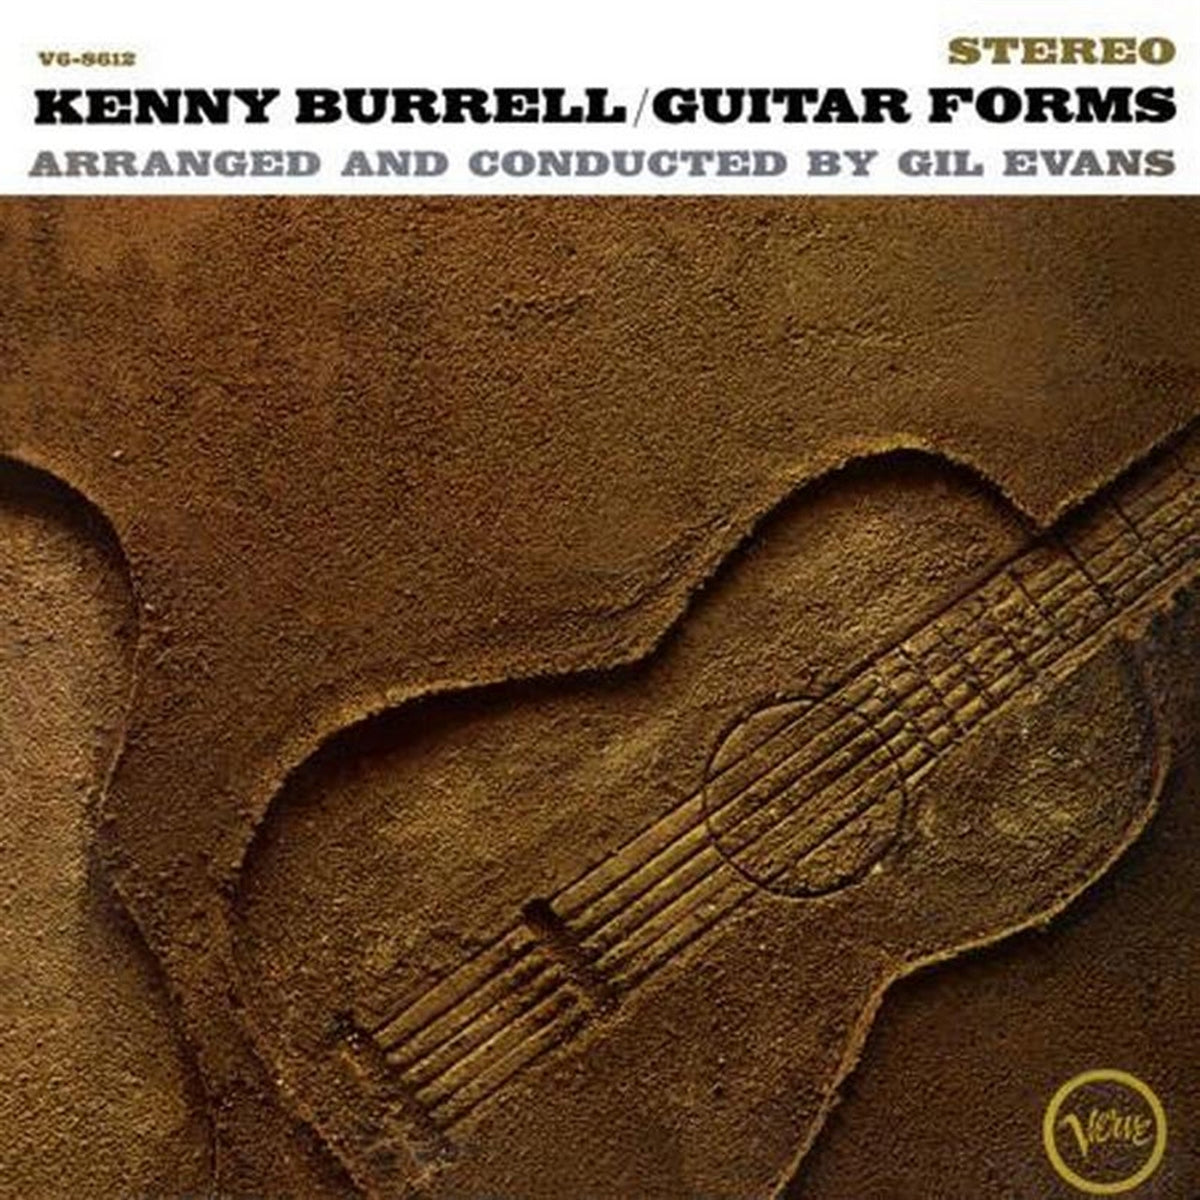 Kenny Burrell - Guitar Forms [Verve Acoustic Sounds Series]